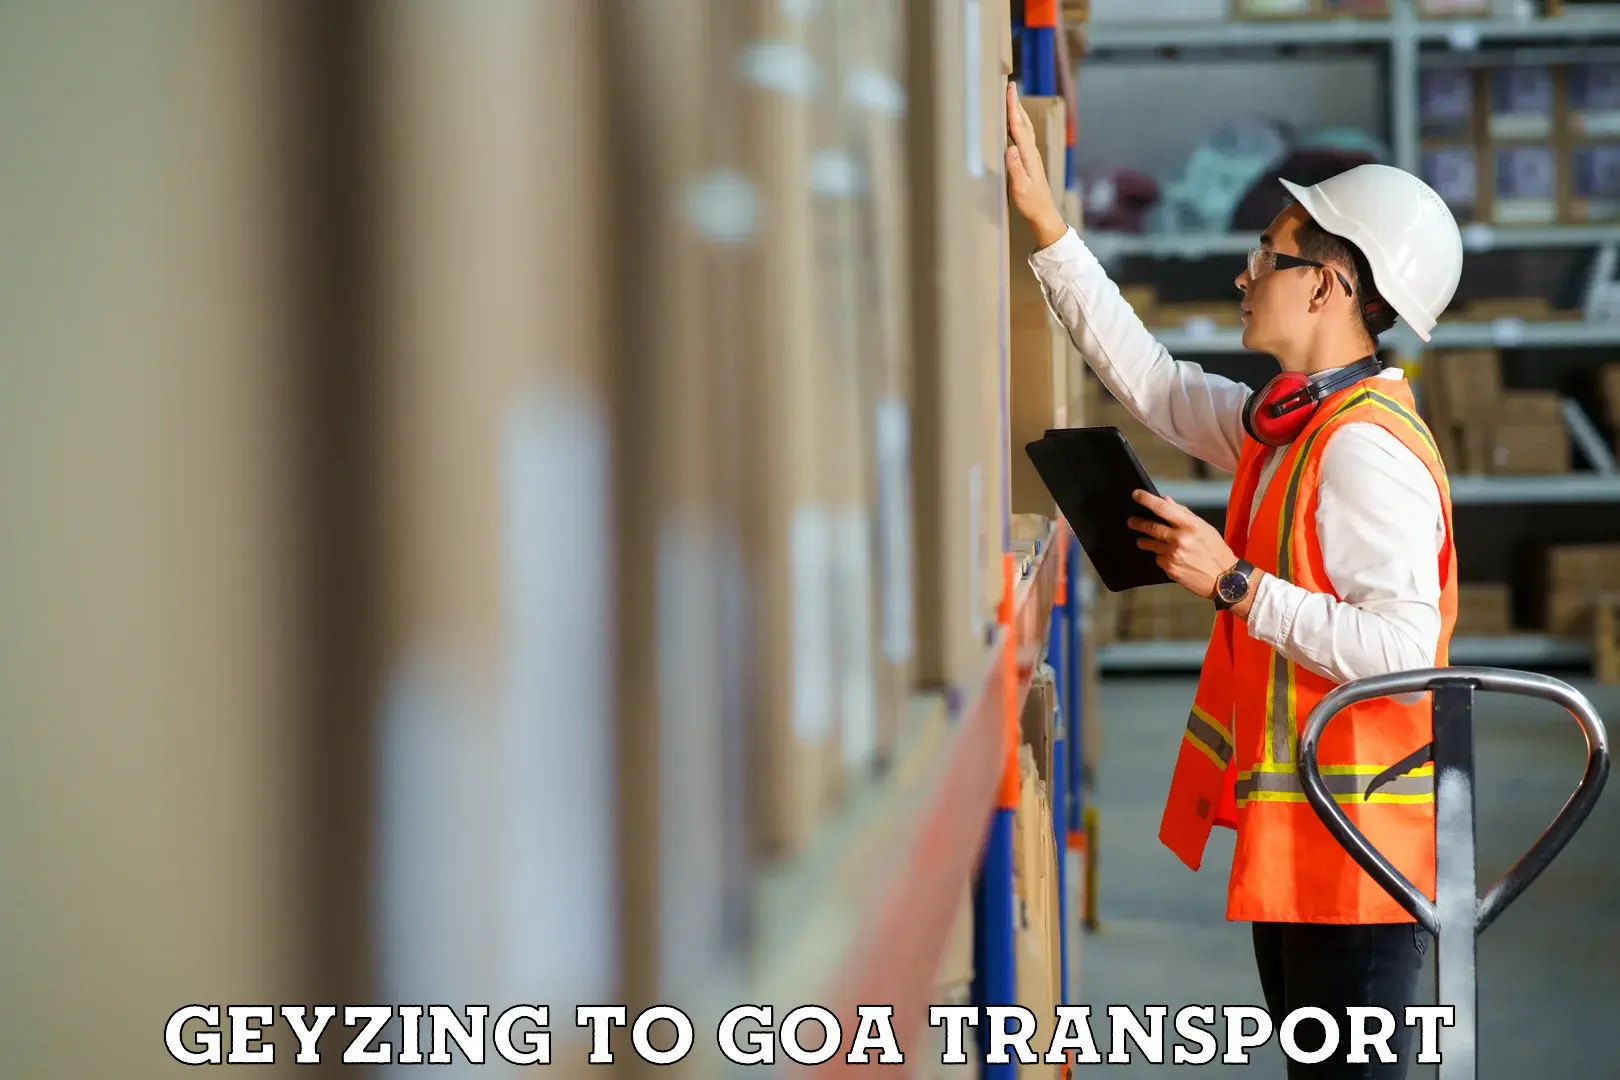 Luggage transport services Geyzing to Goa